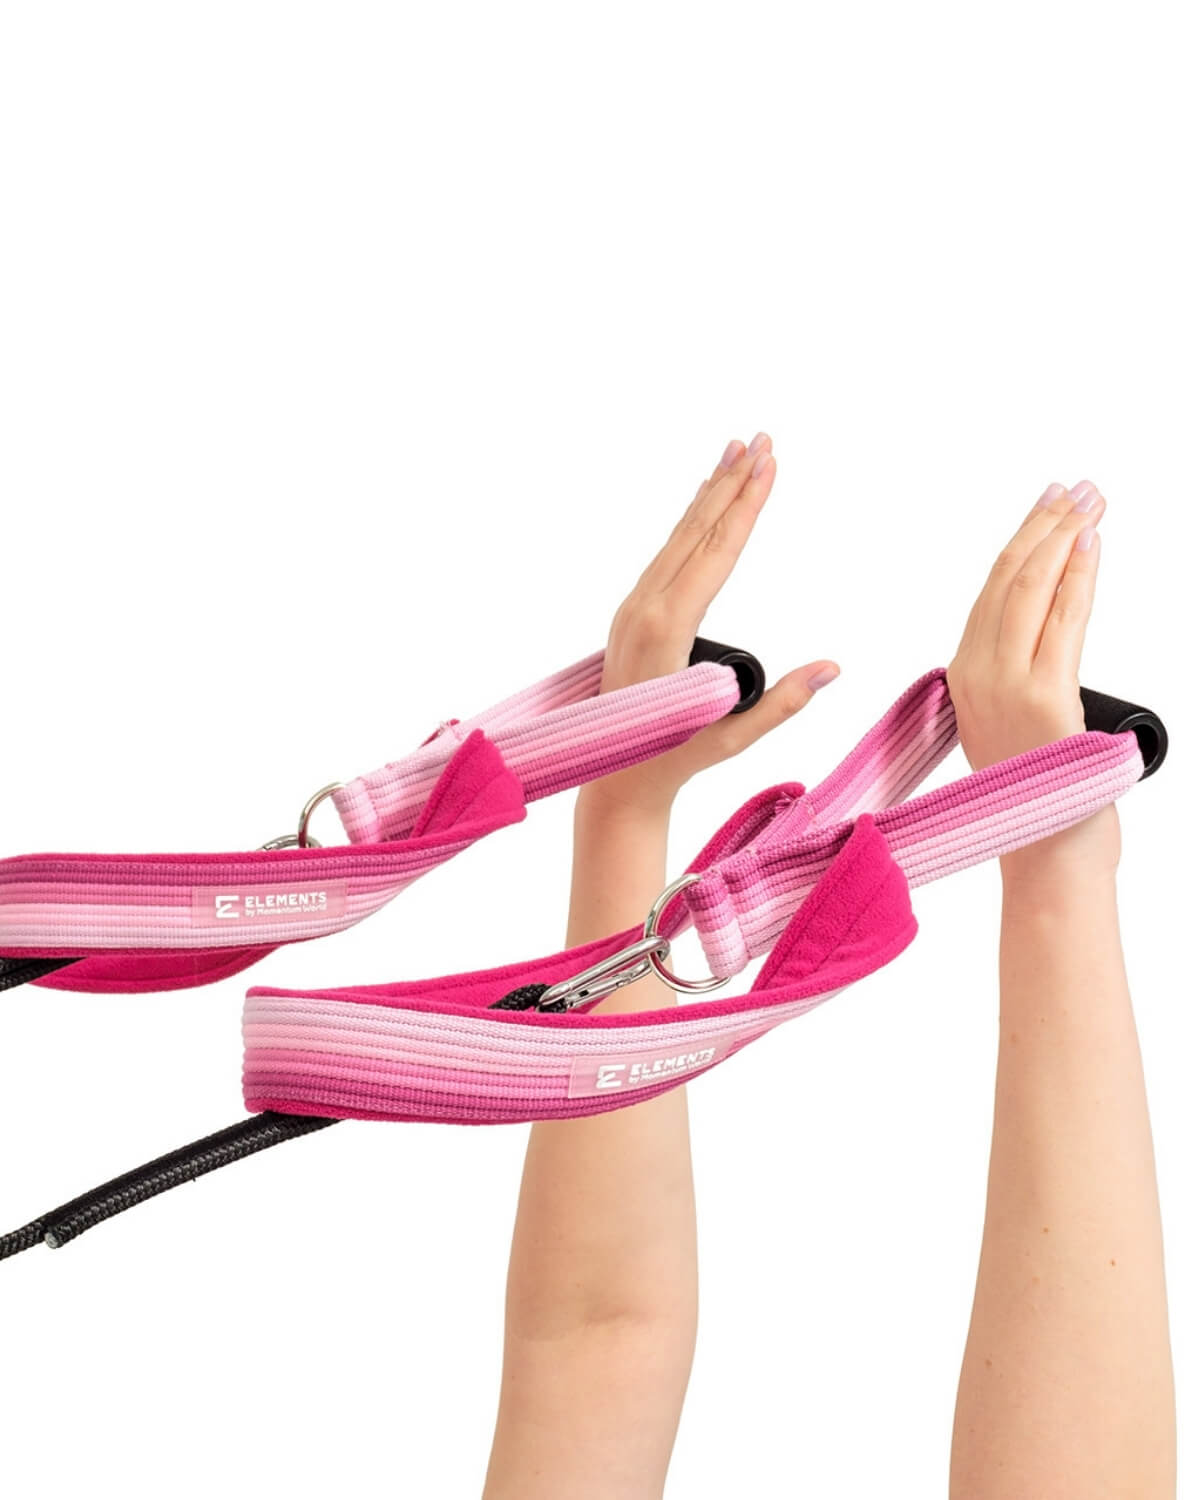 Neon Pink Durable Pilates Reformer Double Loop Straps - Pretty Pilates